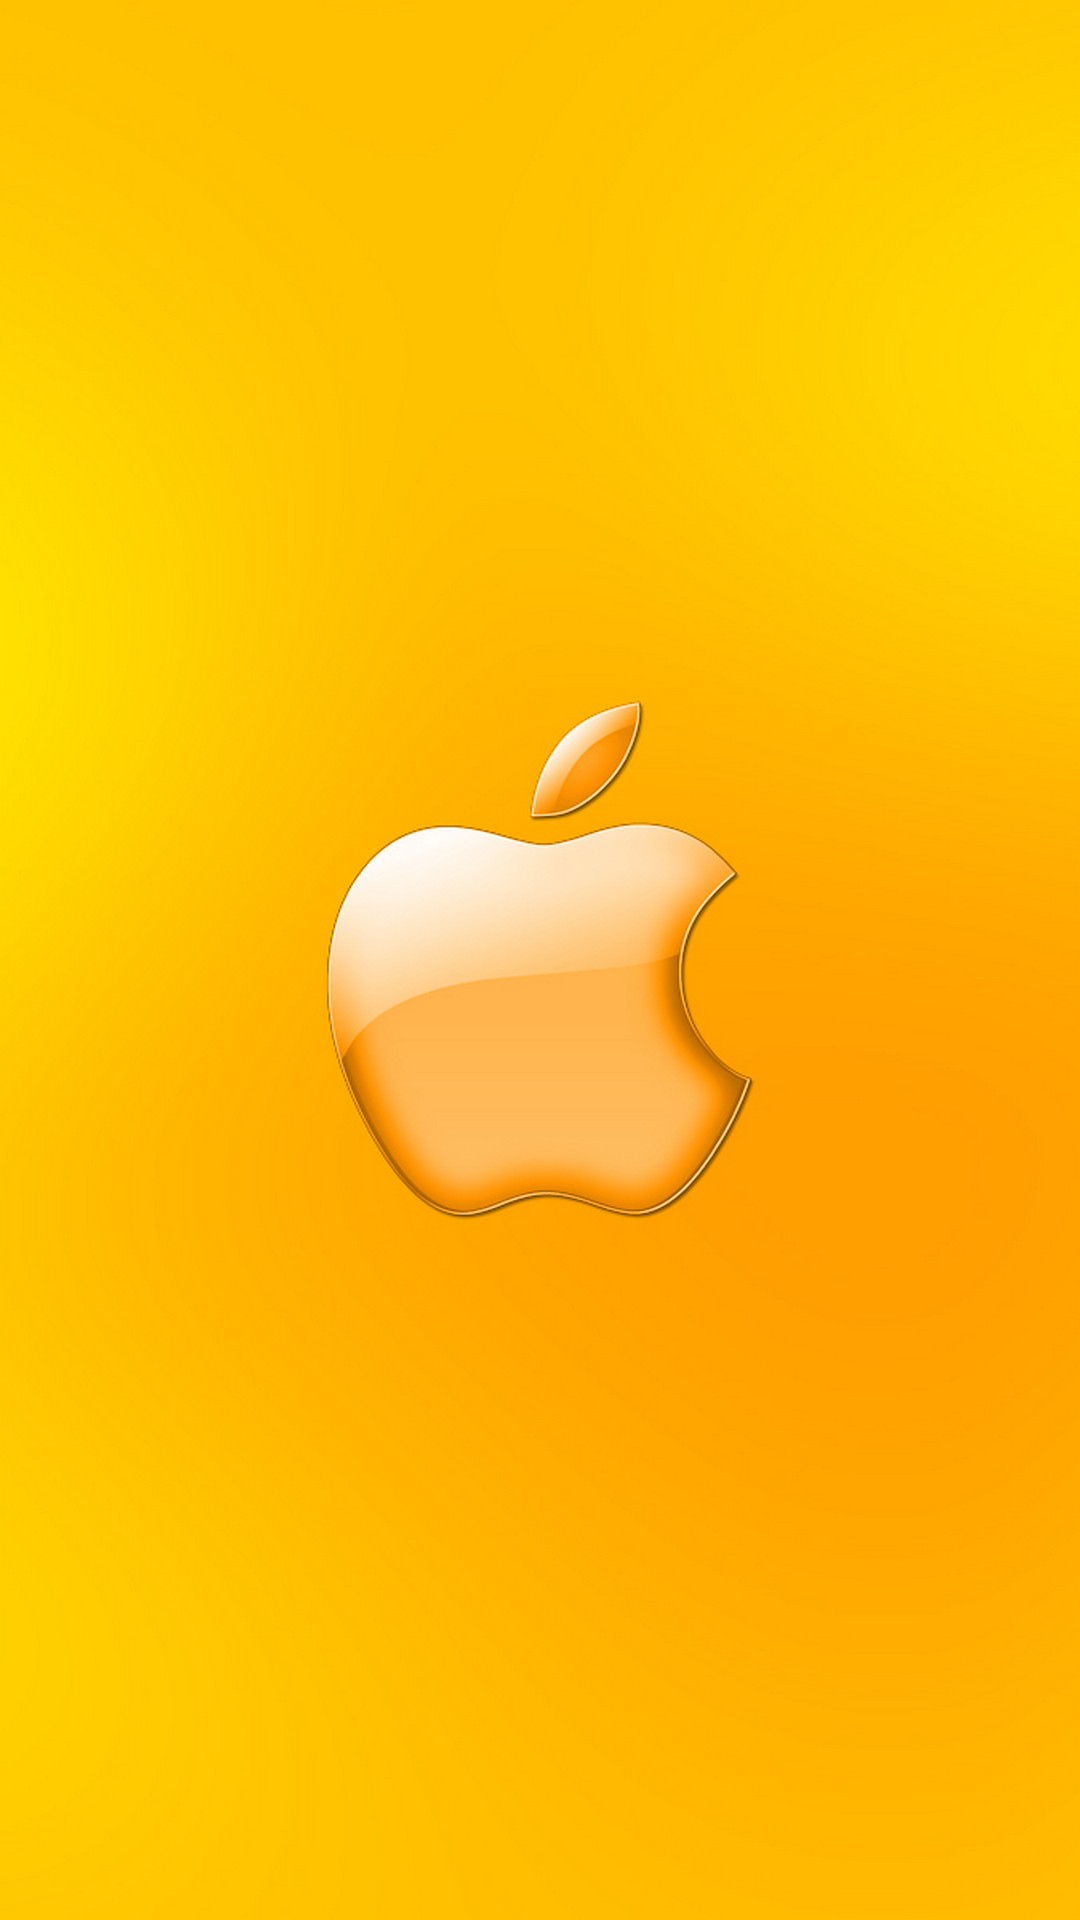 Apple Gold Logo For Android Wallpaper with HD resolution 1080x1920